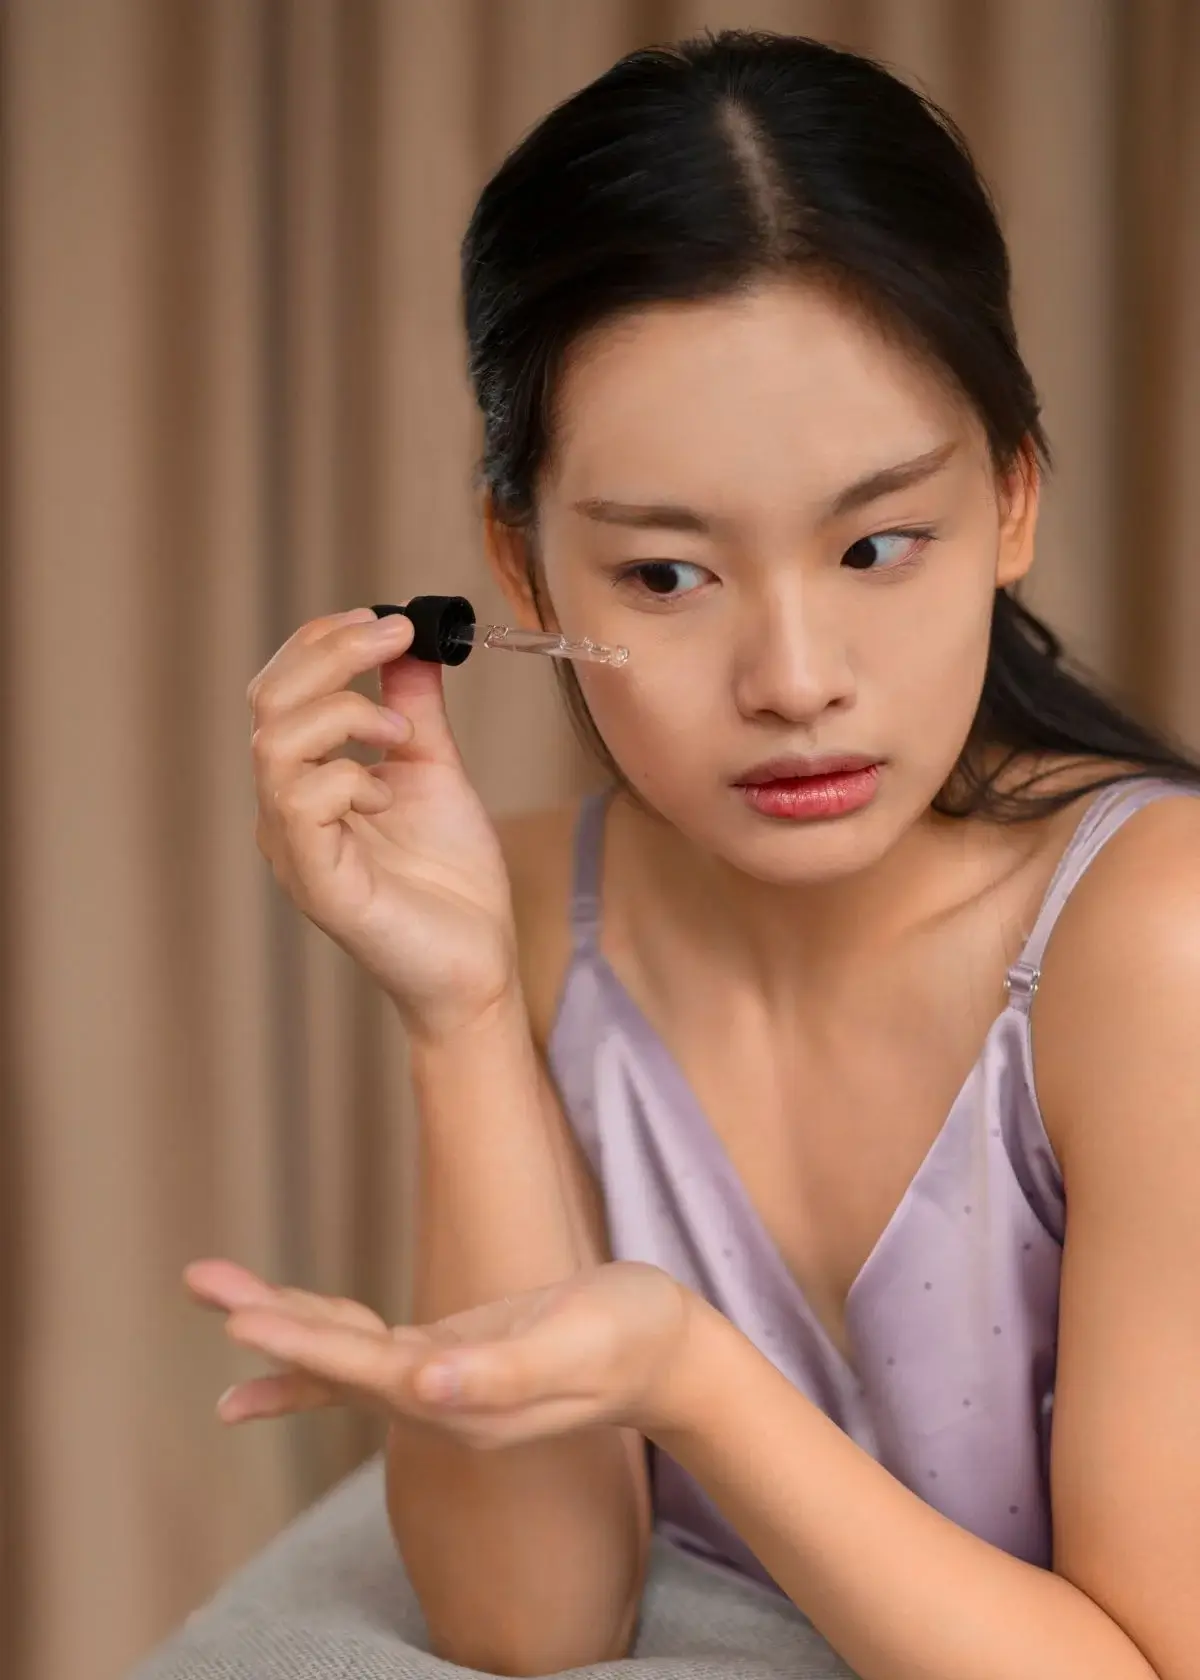 Why is Korean retinol known for its effectiveness in skincare?